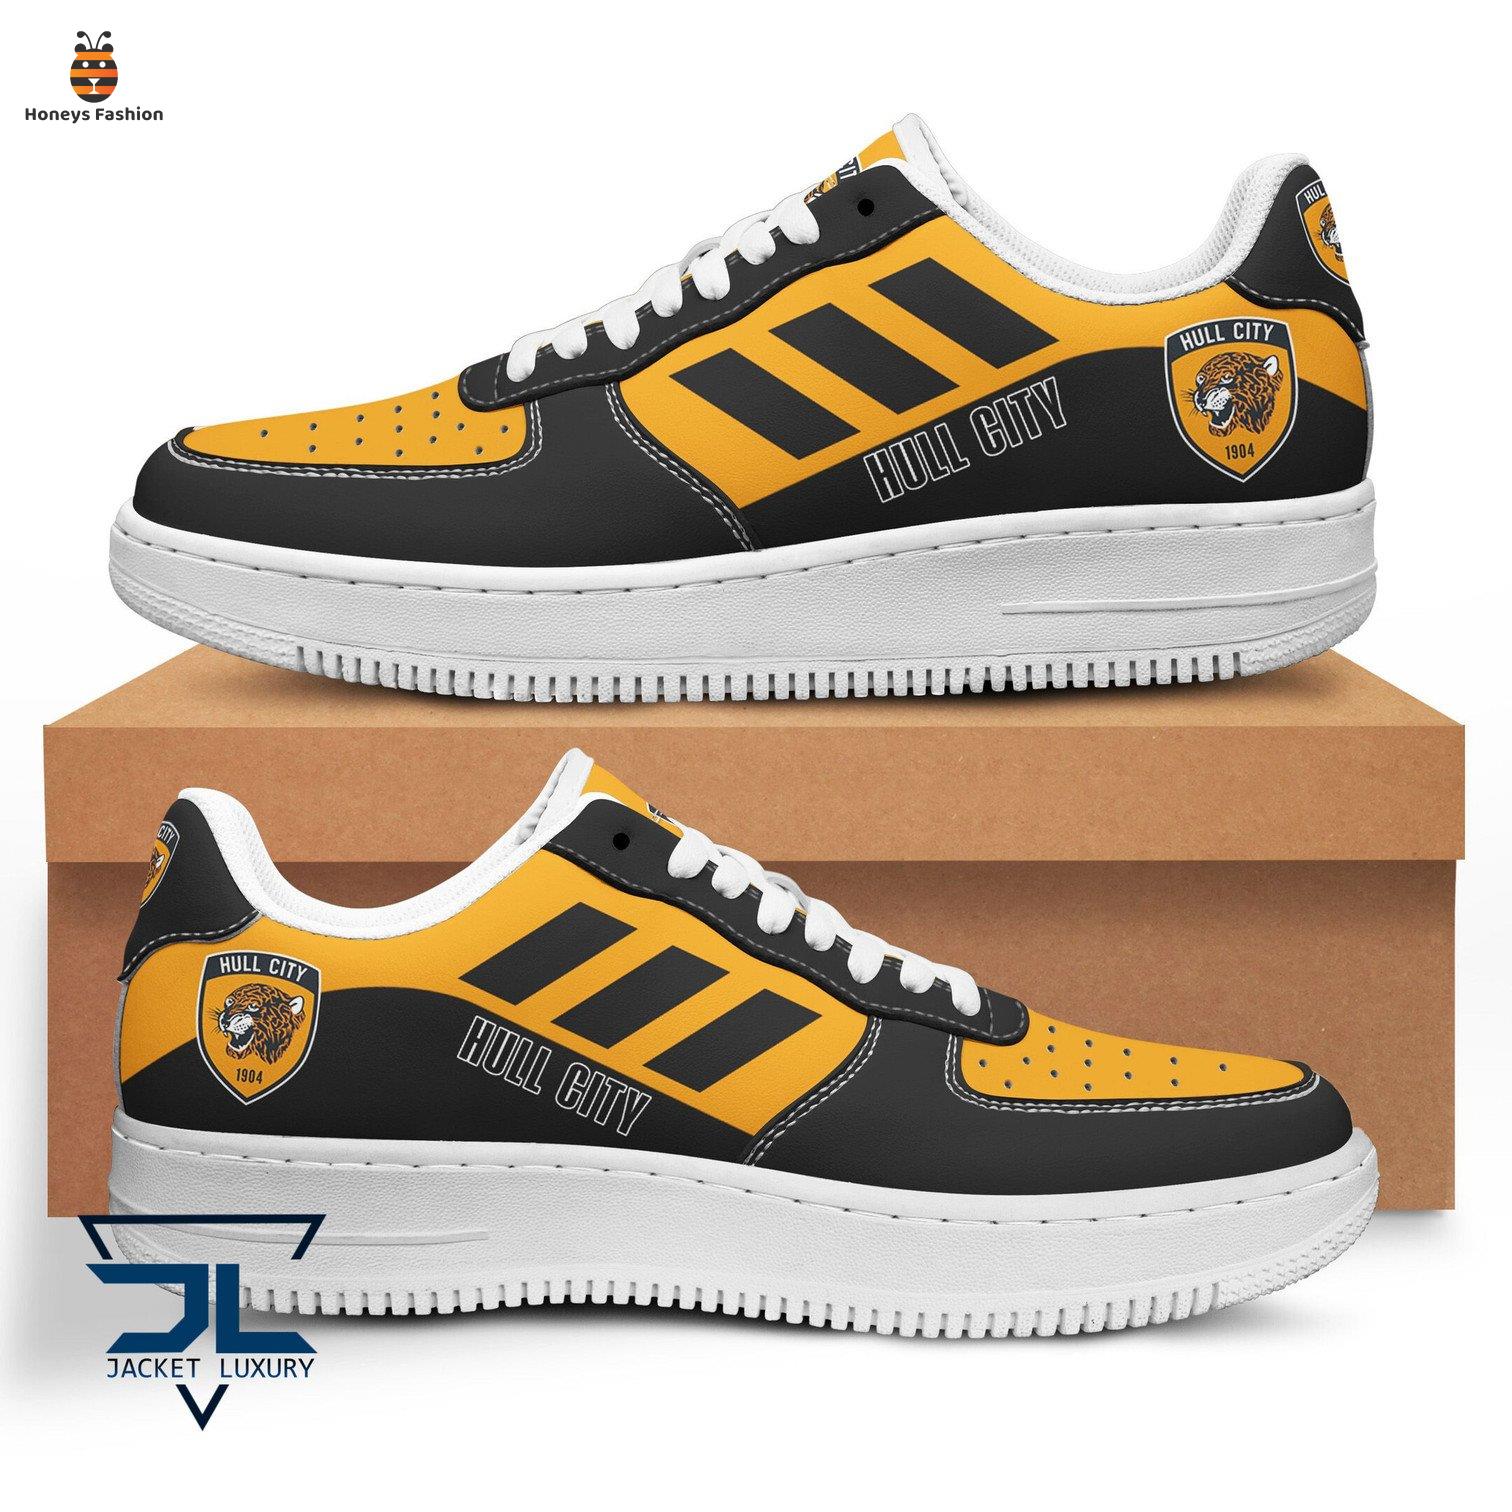 Hull City air force 1 shoes